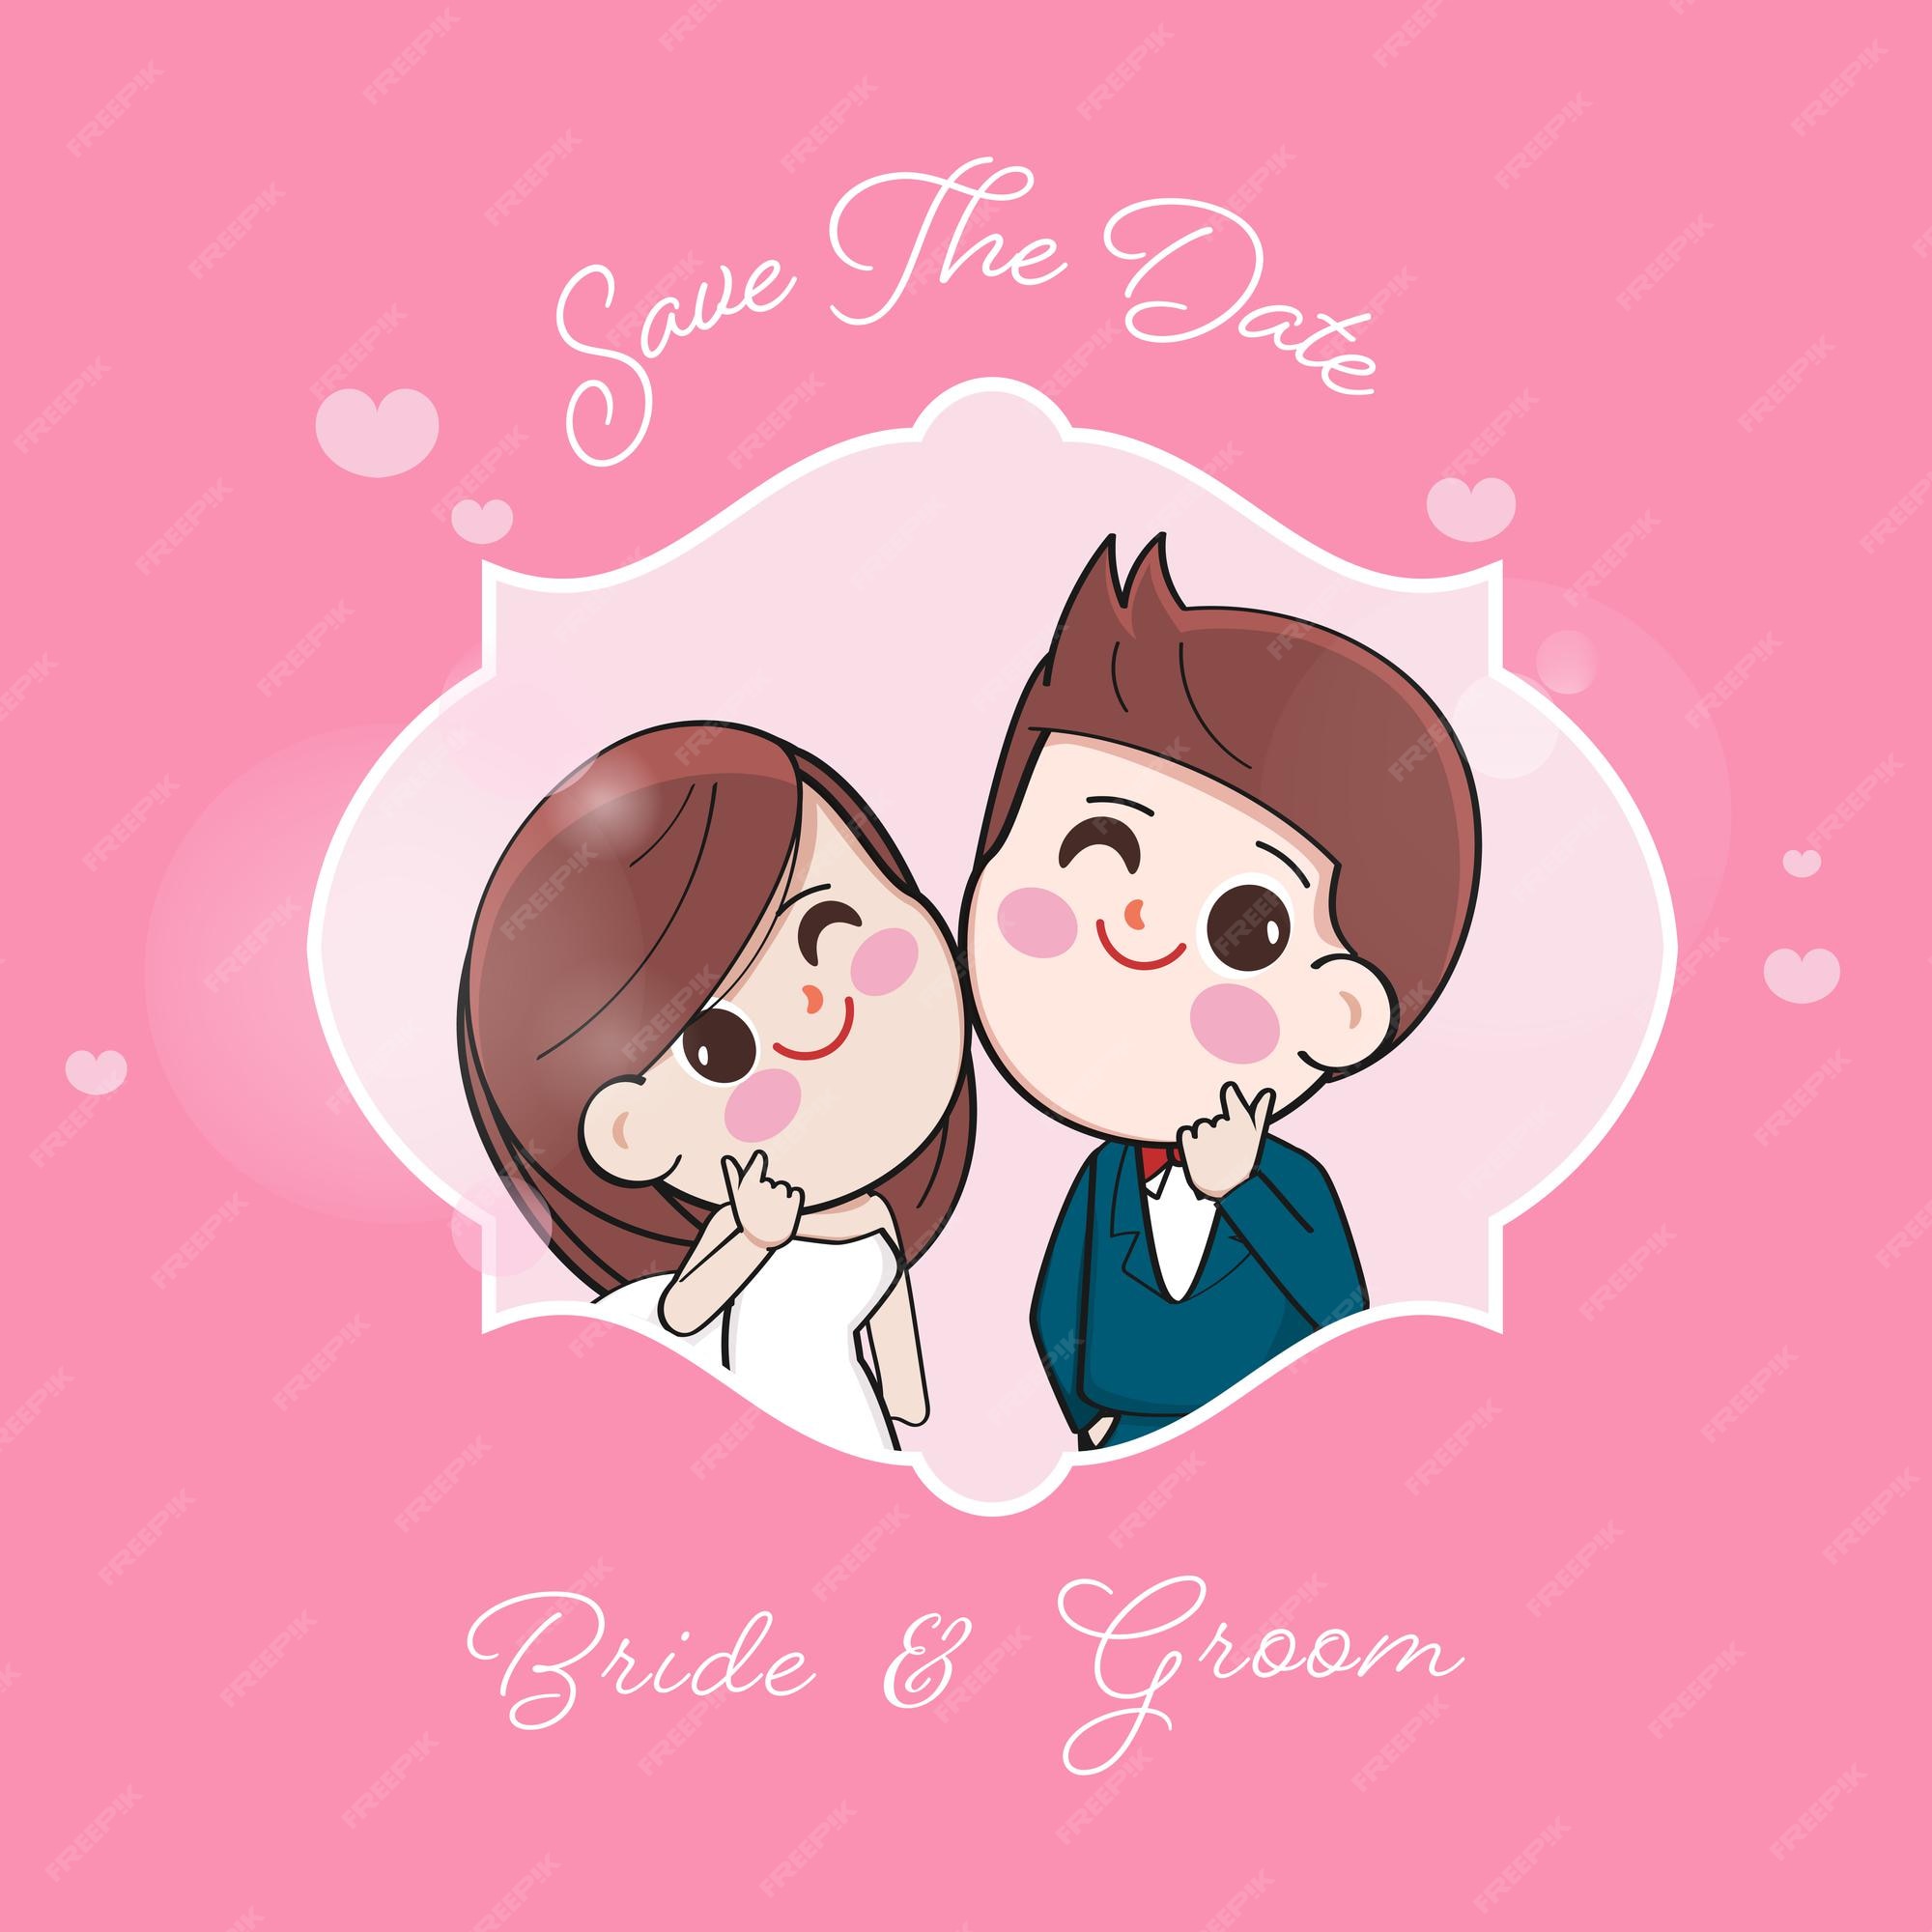 Page 2 | Cute Couple Cartoon Images - Free Download on Freepik